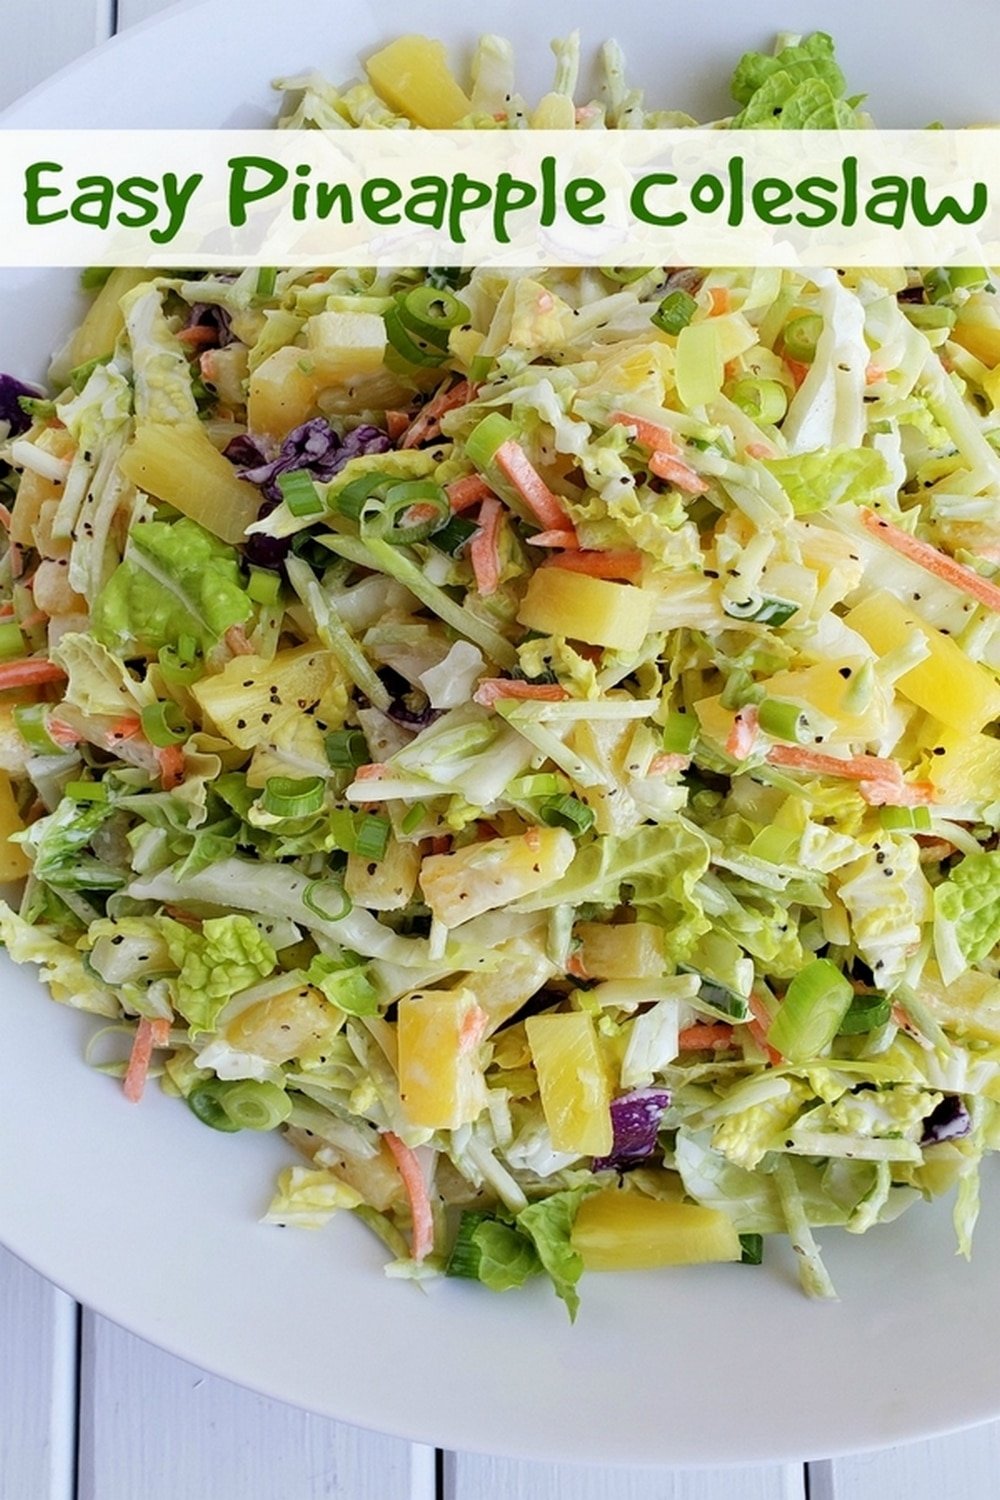 Enjoy the flavors of pineapple coleslaw. This easy and delicious side dish is a great addition to any meal, from sandwiches to barbecues. via @cmpollak1